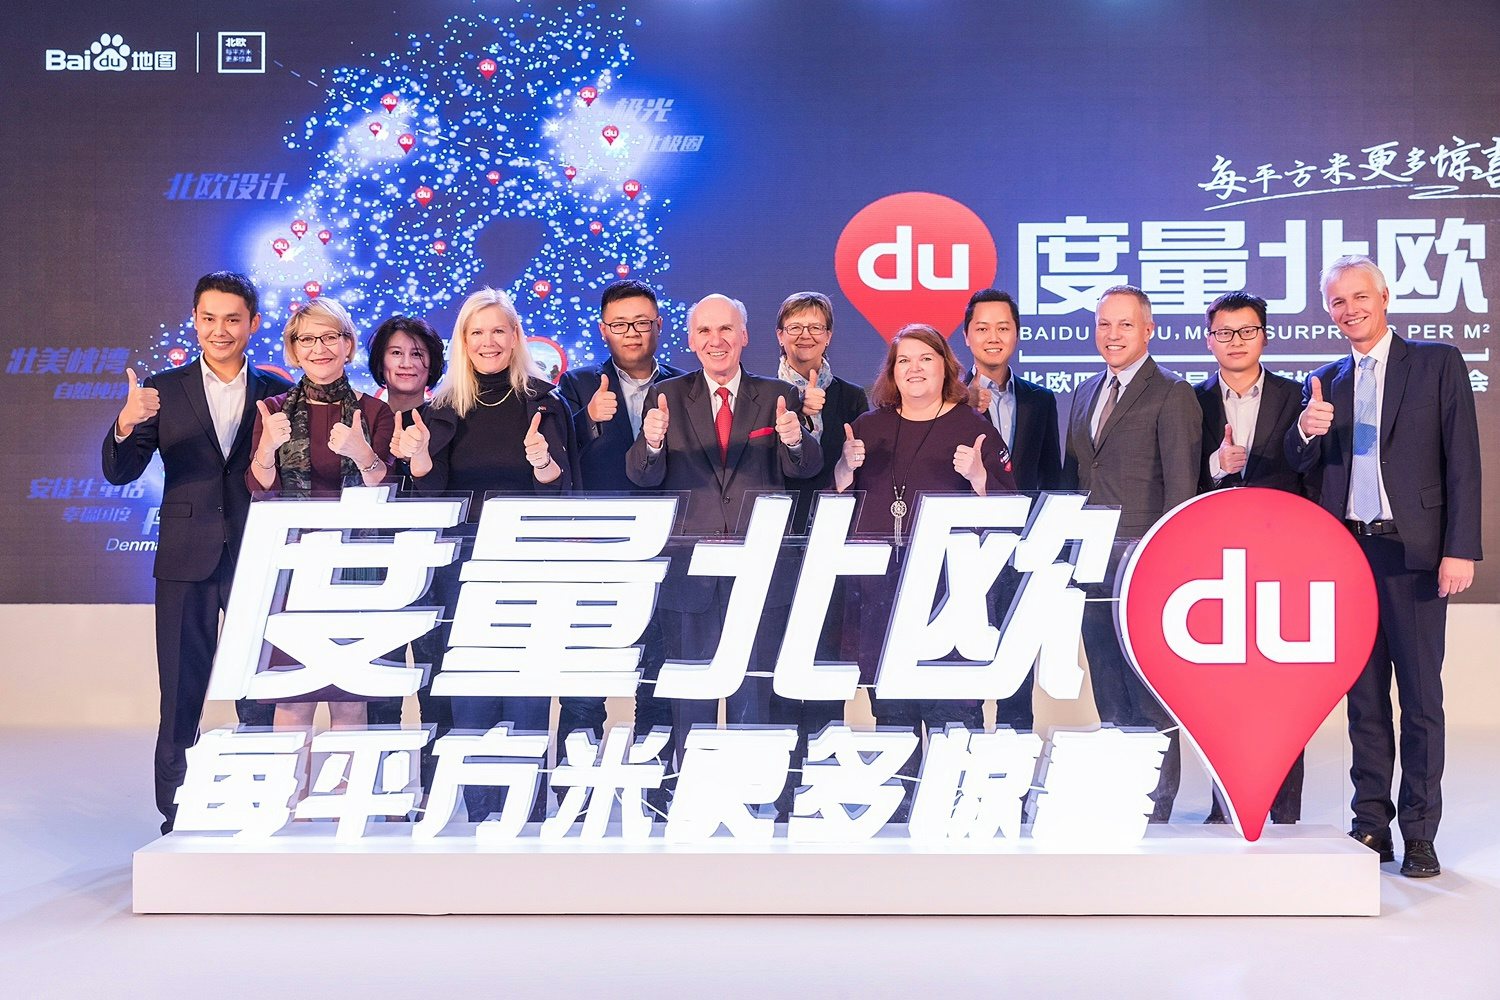 Denmark's Ambassador to China, A. Carsten Damsgaard, participated in an event hosted by the joint Scandinavian Tourism Board and Baidu to celebrate their new cooperation. (Courtesy Photo)